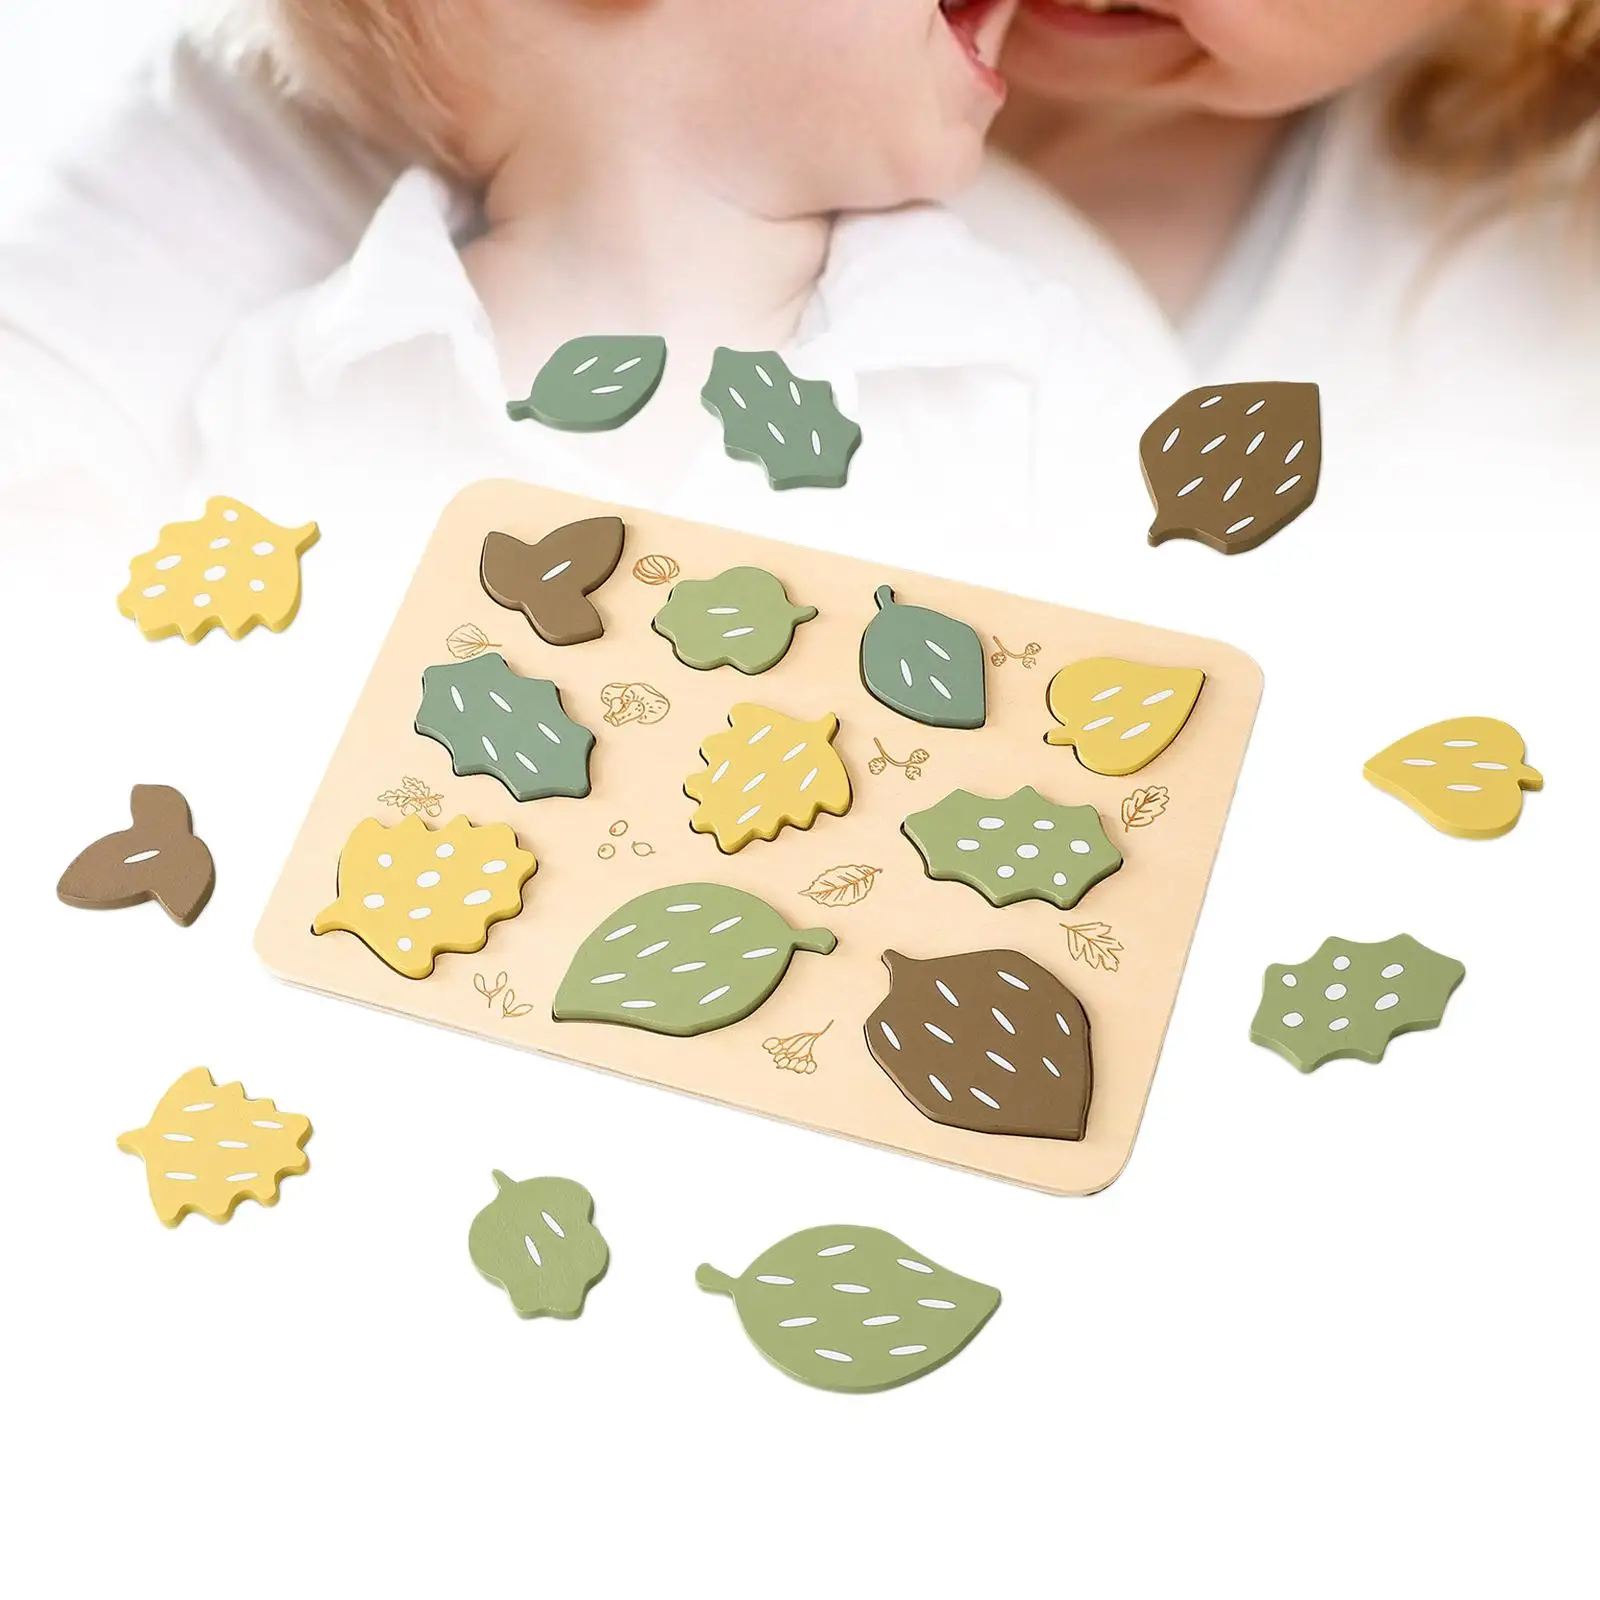 Leaf Jigsaw Puzzles Sorting Puzzle Colorful Shape Fine Motor Skill Stacking Blocks for Preschool Boys Toddlers Girls Kids